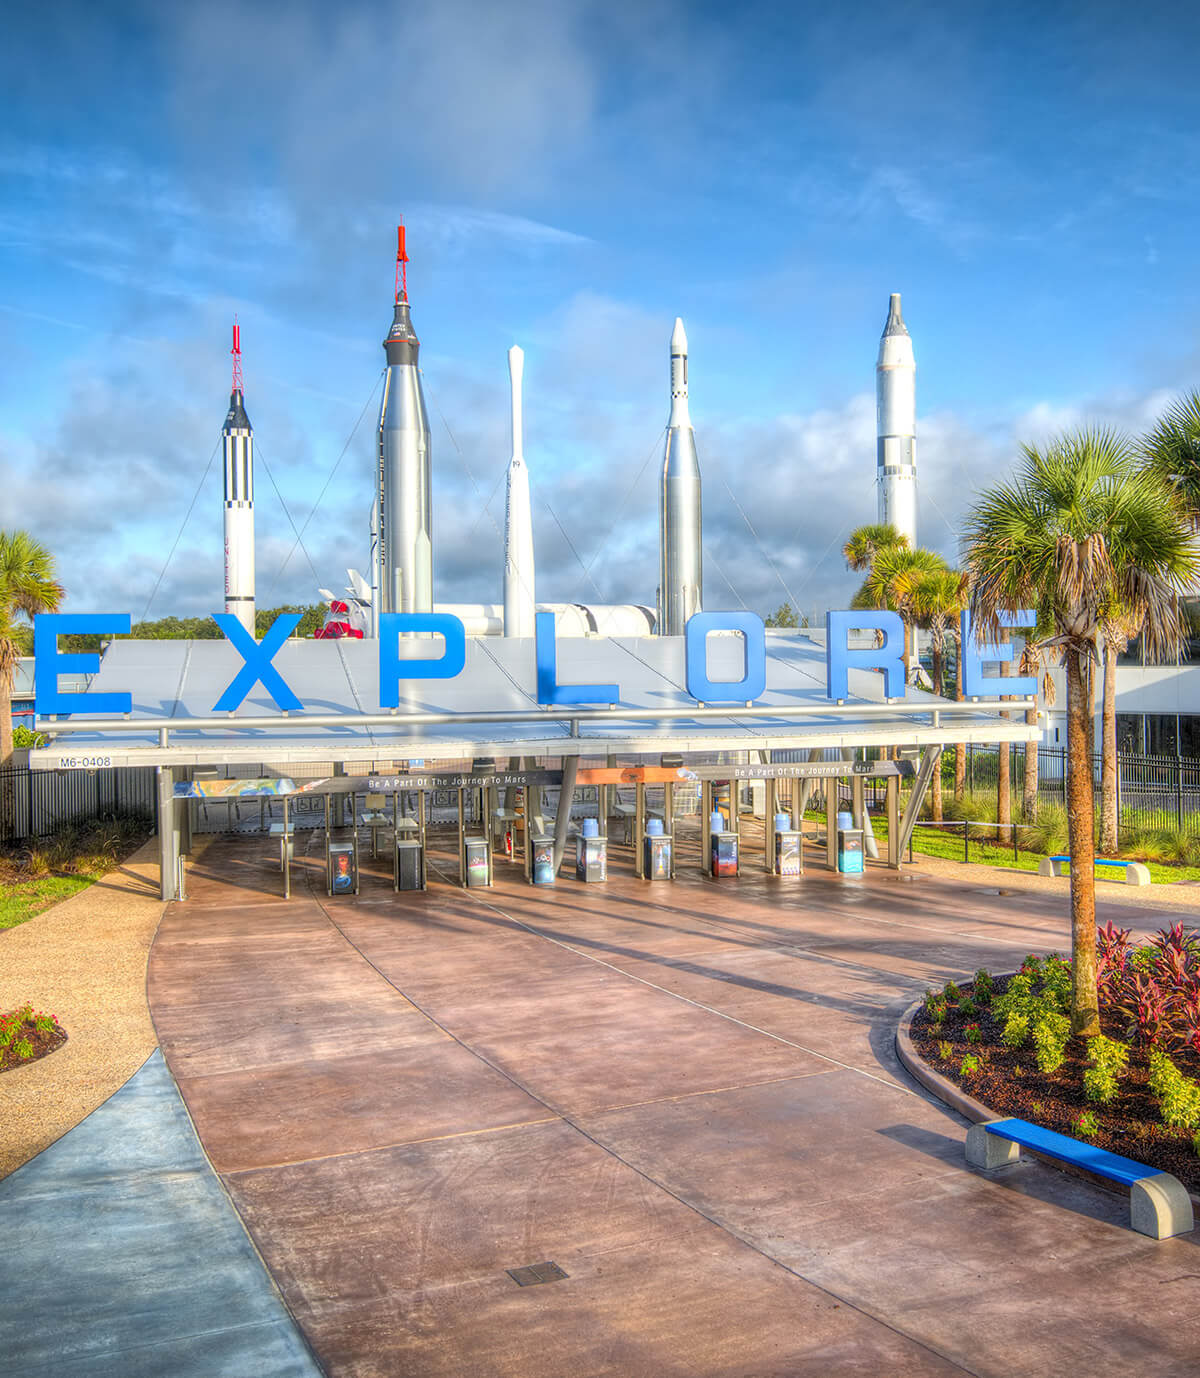 tours kennedy space center